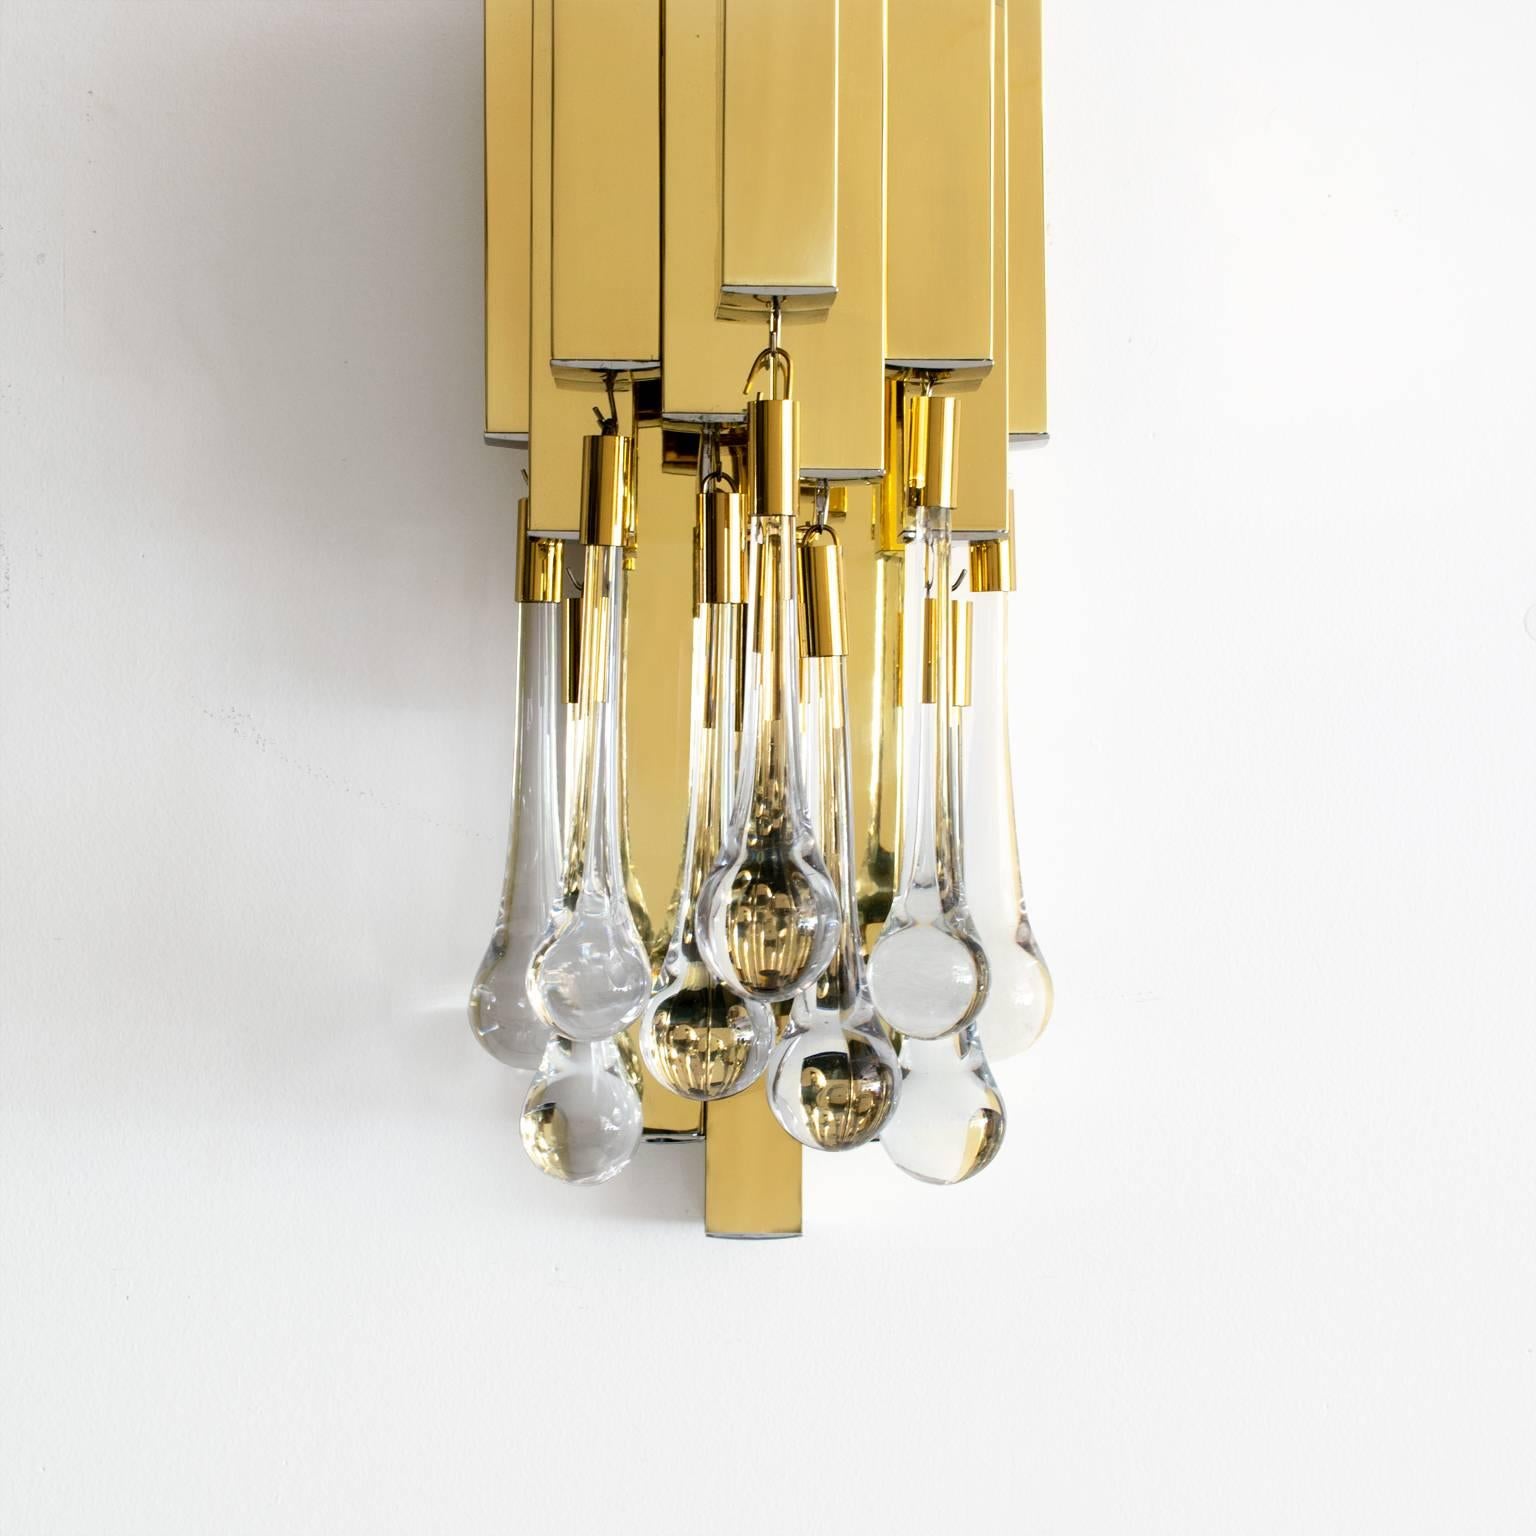 20th Century Pair of Mid-Century Modern Brass and Crystal Sconces by Lumica, Barcelona Spain For Sale